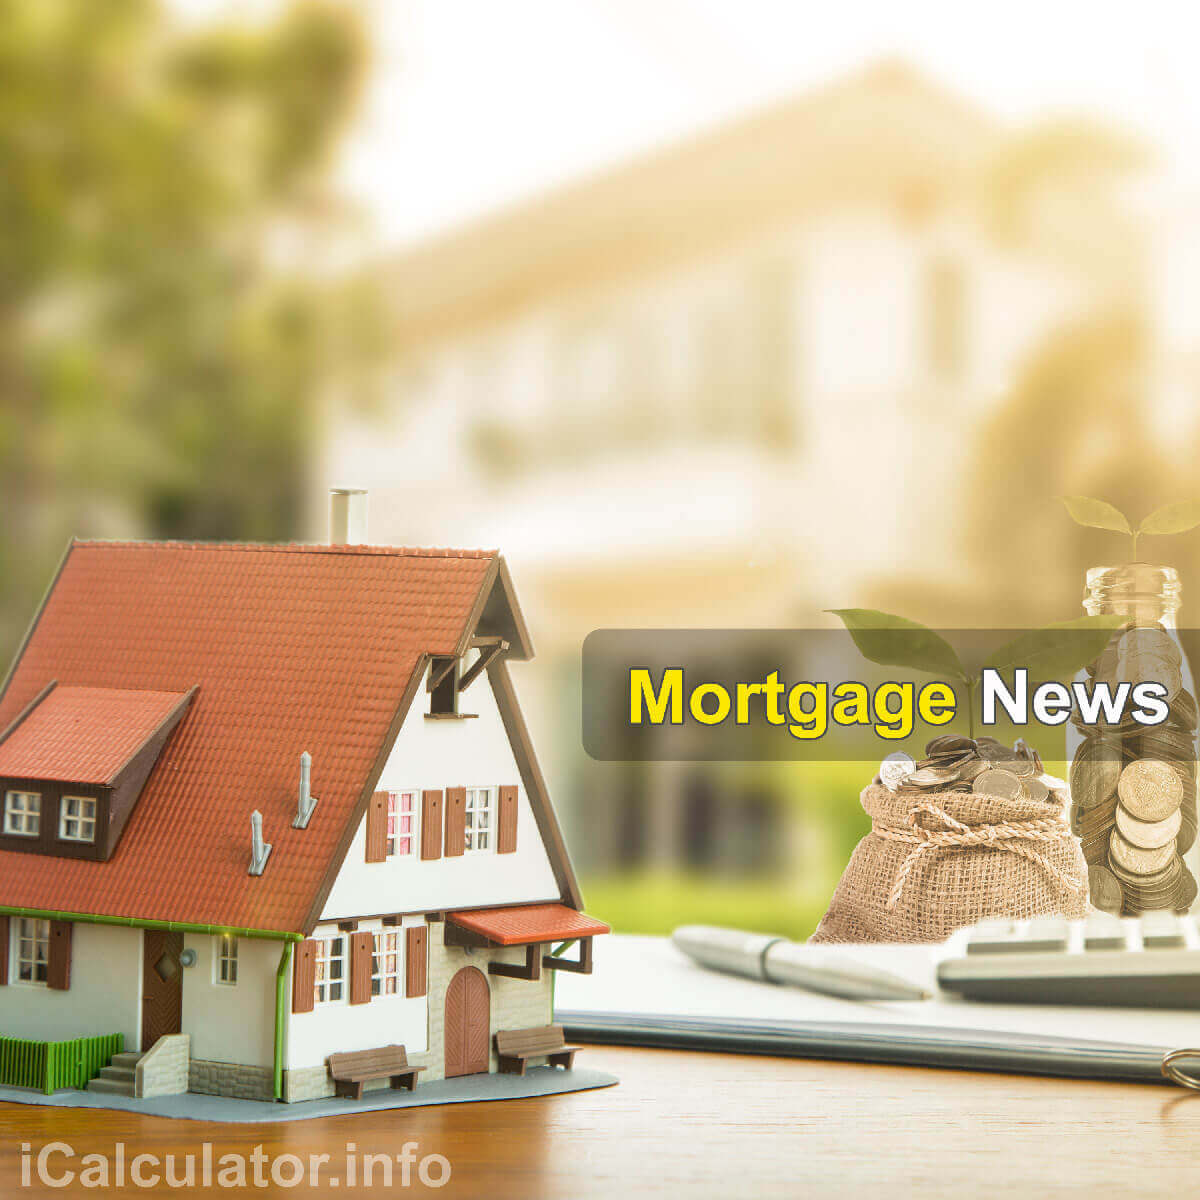 UK Mortgage News. The November 2019 Mortgage news has great news for those 'Mortgage prisonors' previously trapped in mortgage deals that unfairly penalises them despite maintaining regular and upto date mortgage payments.